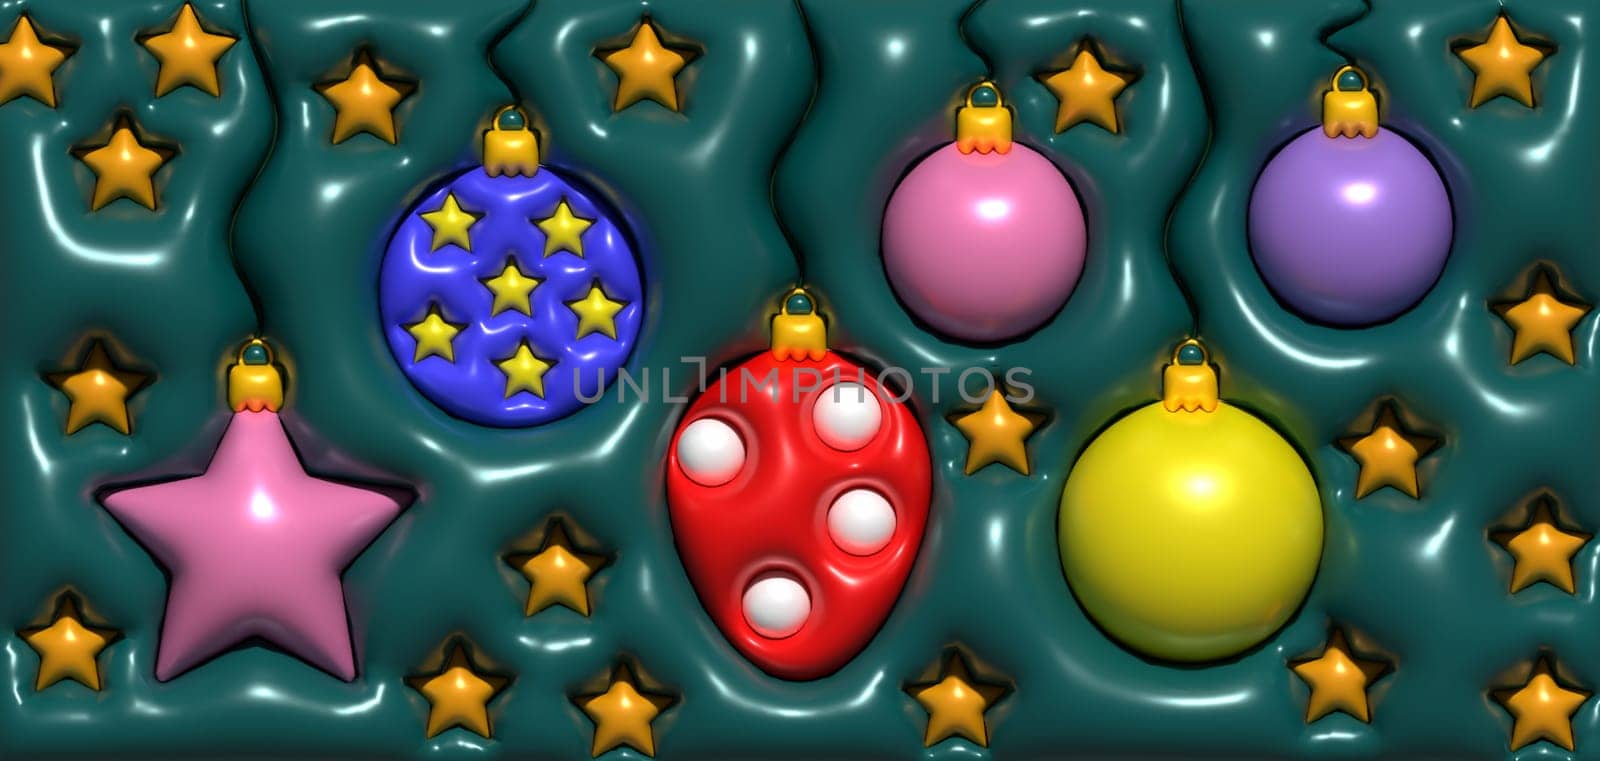 New Year's decor balls and figurines on a green background, 3D rendering illustration